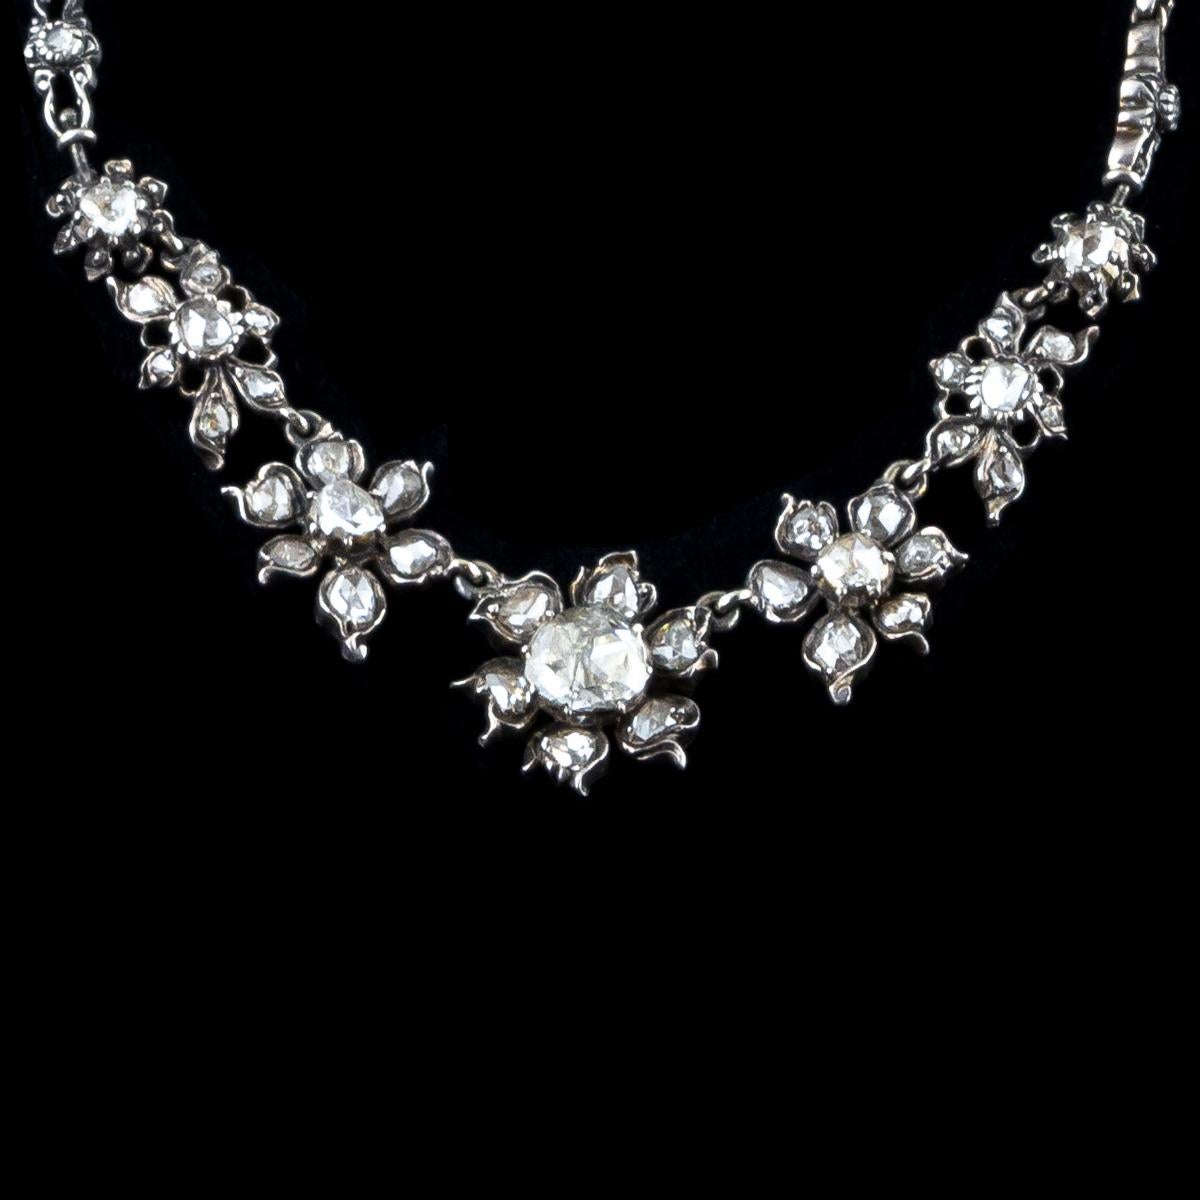 1840s sophisticated 925 °/°° silver and 18 kt white gold antique necklace with totaling 6.70 ct rose cut diamonds.
With its triangular facets arranged like the petals of a rose, this diamond was elected king of solitaires for its round shape, a